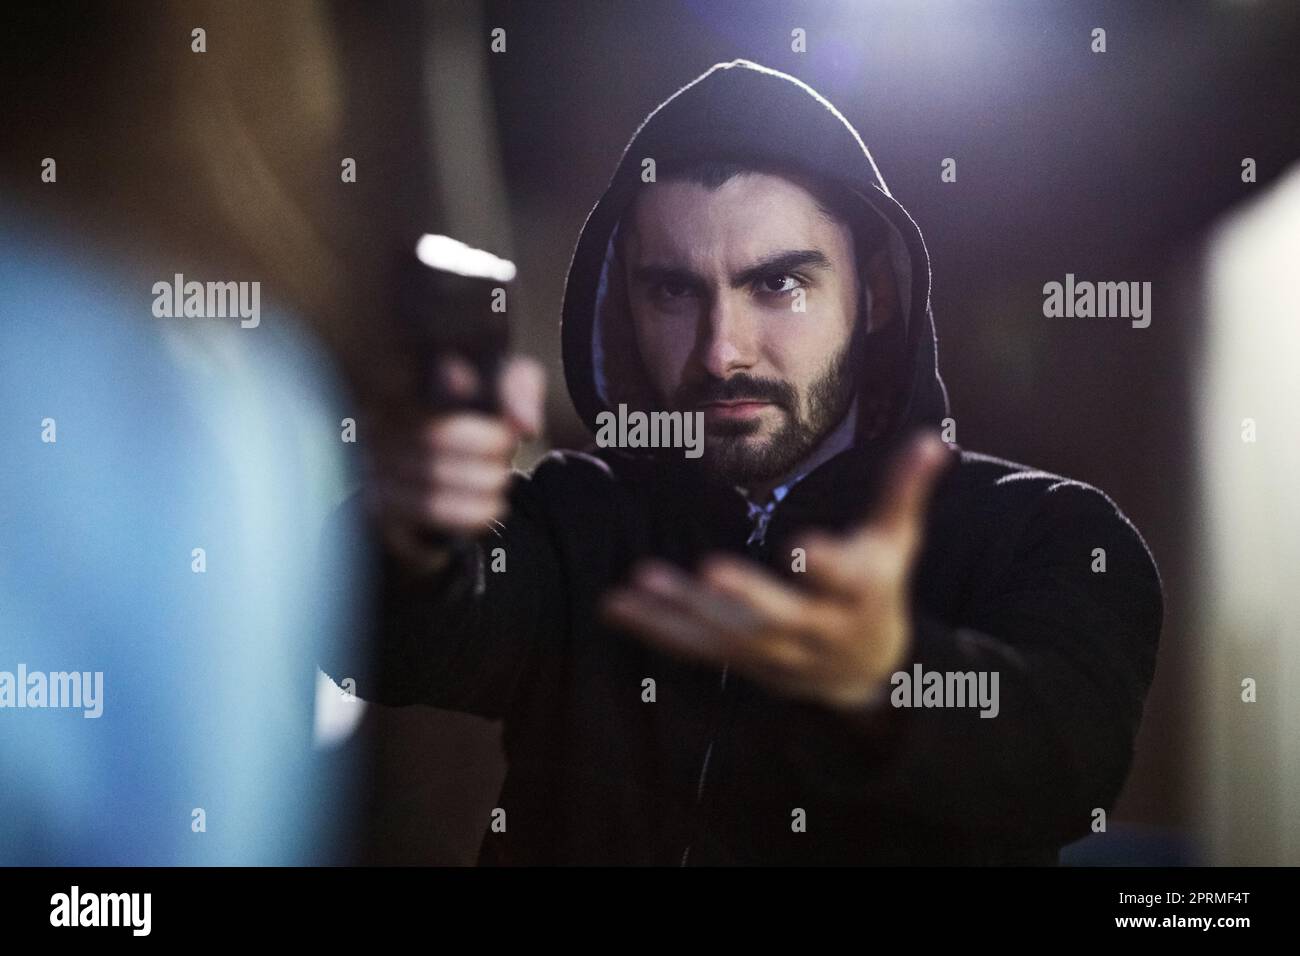 Your money or your life. a gun-wielding thief threatening an unrecognizable victim. Stock Photo